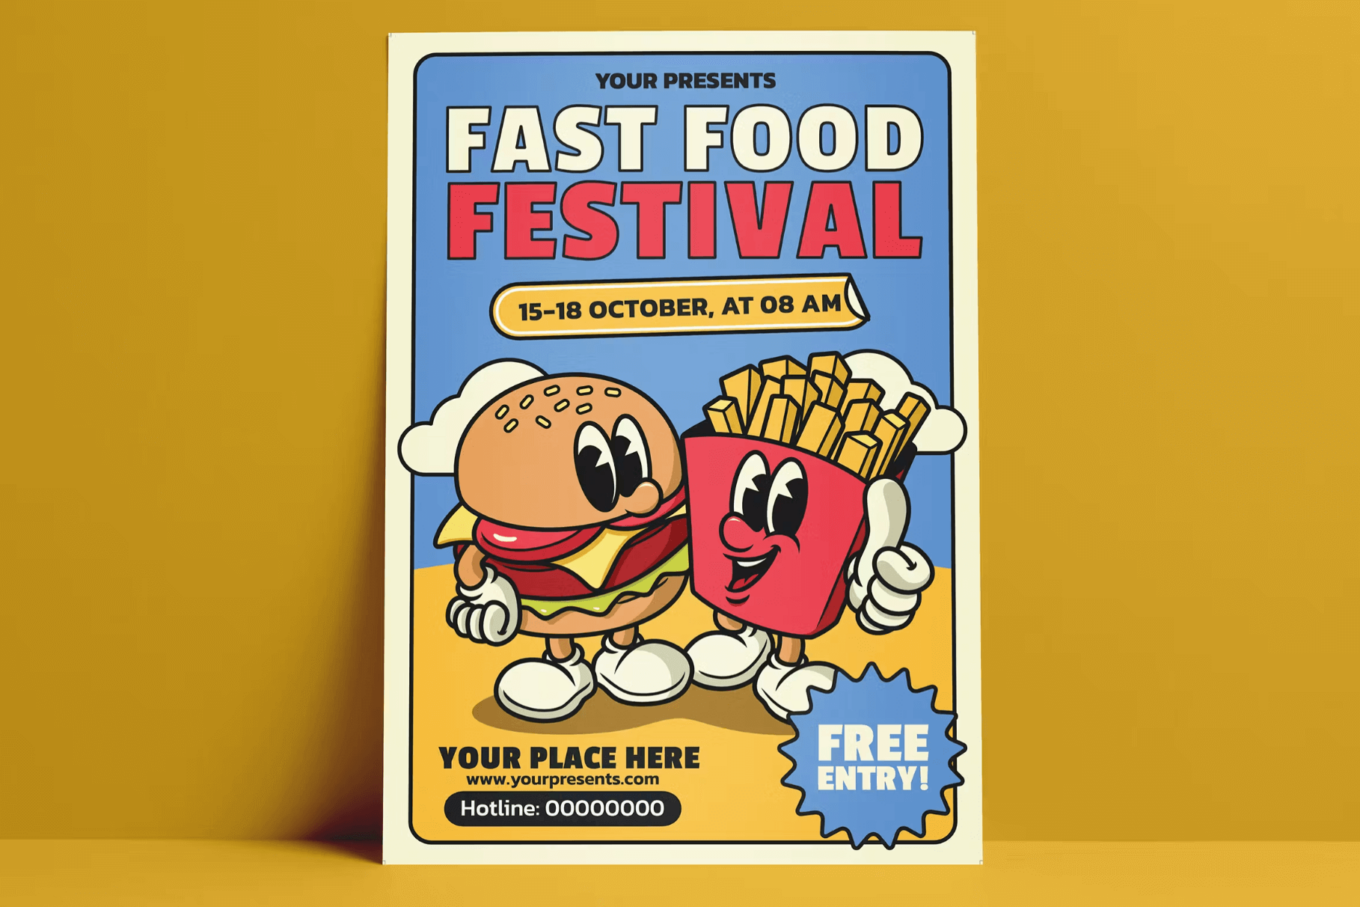 Fast Food Festival Flyer by graptailstudio, one of Monie's favorite graphics items.